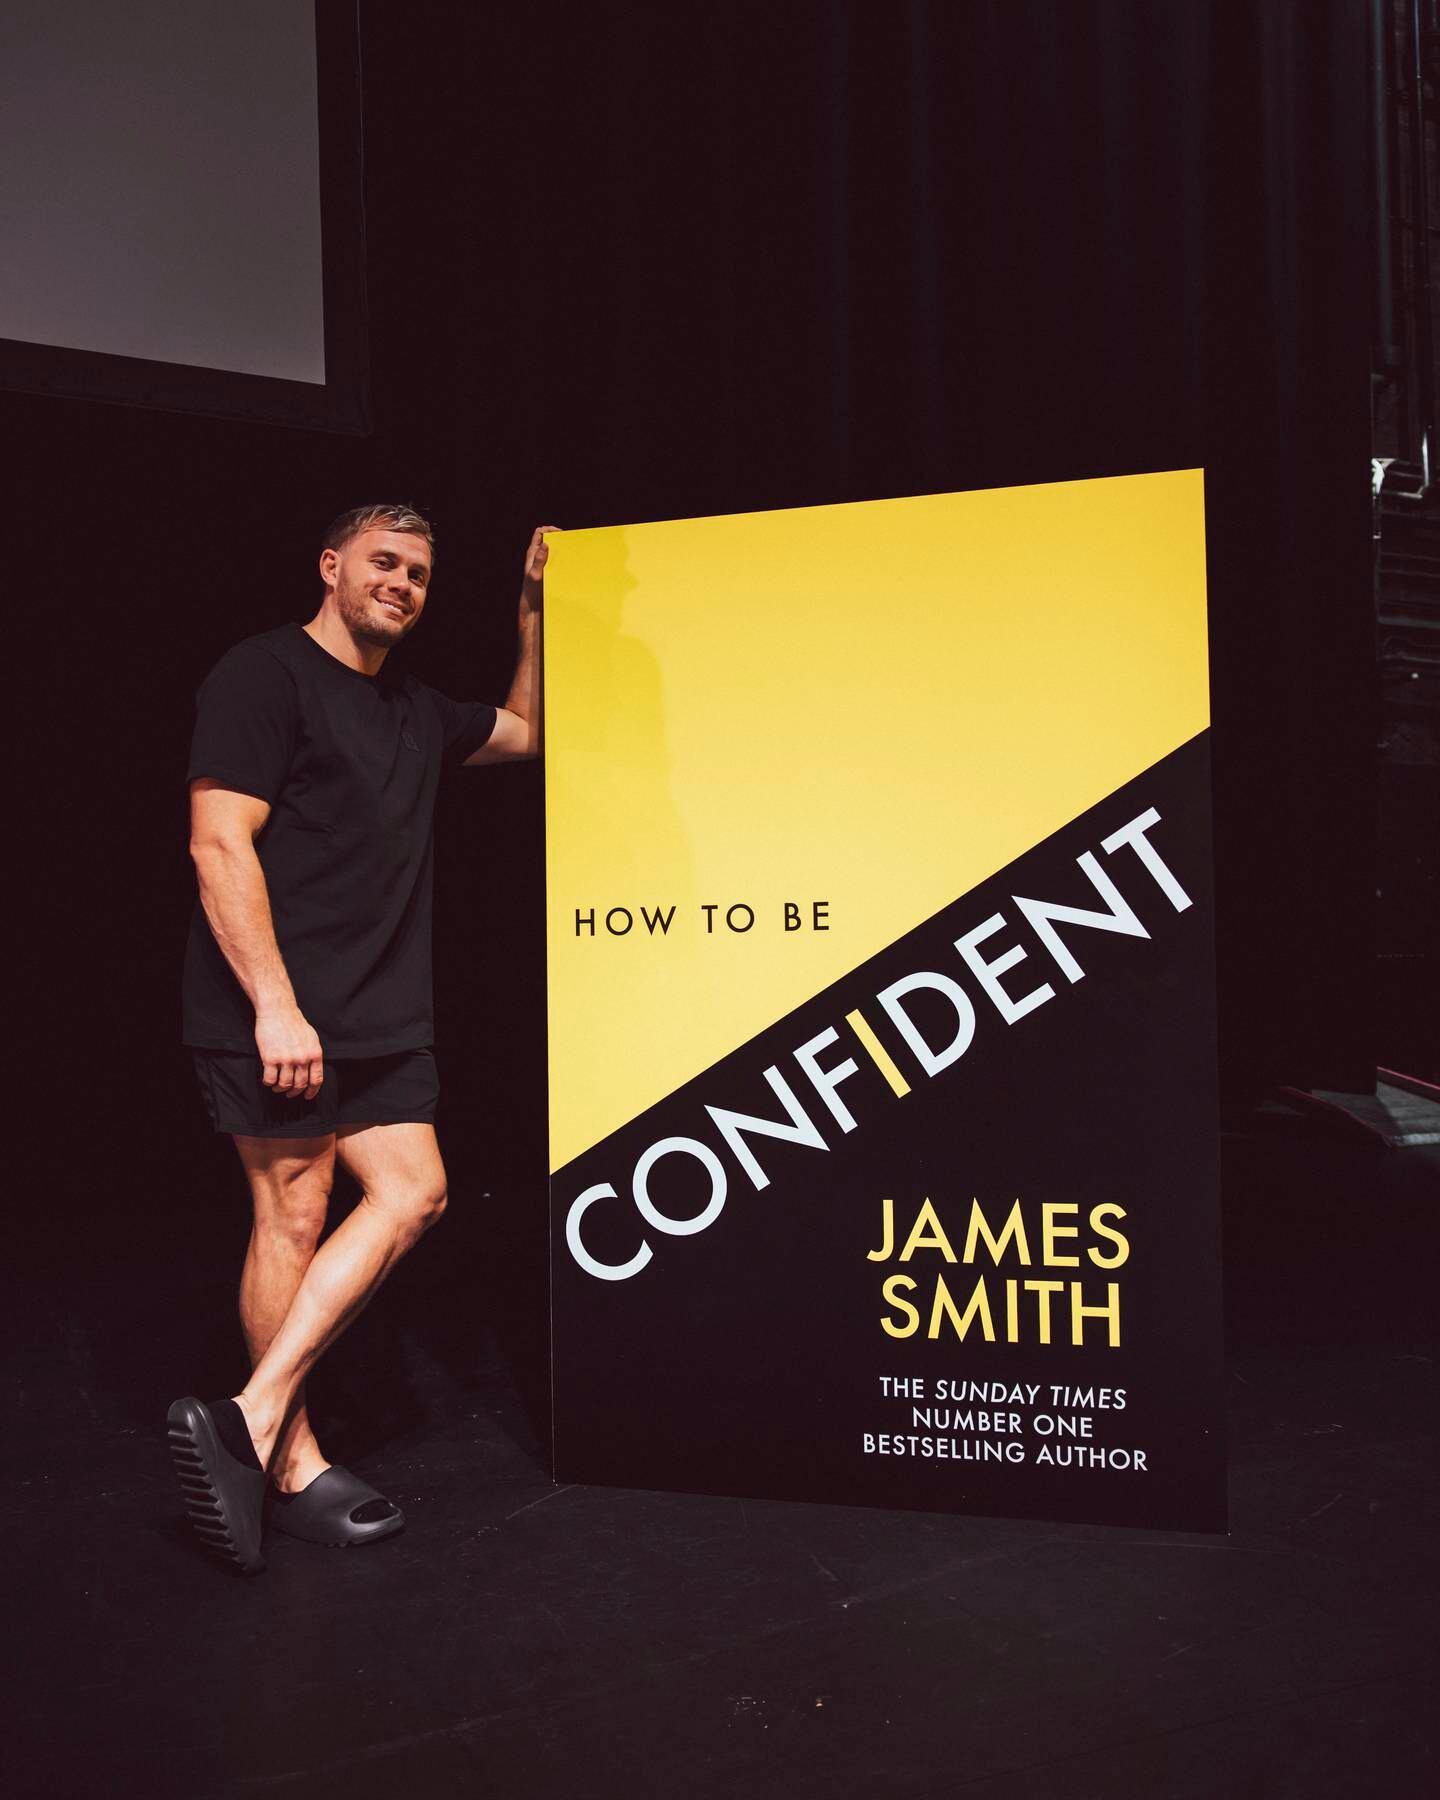 James Smith's third book is called 'How to be Confident'.